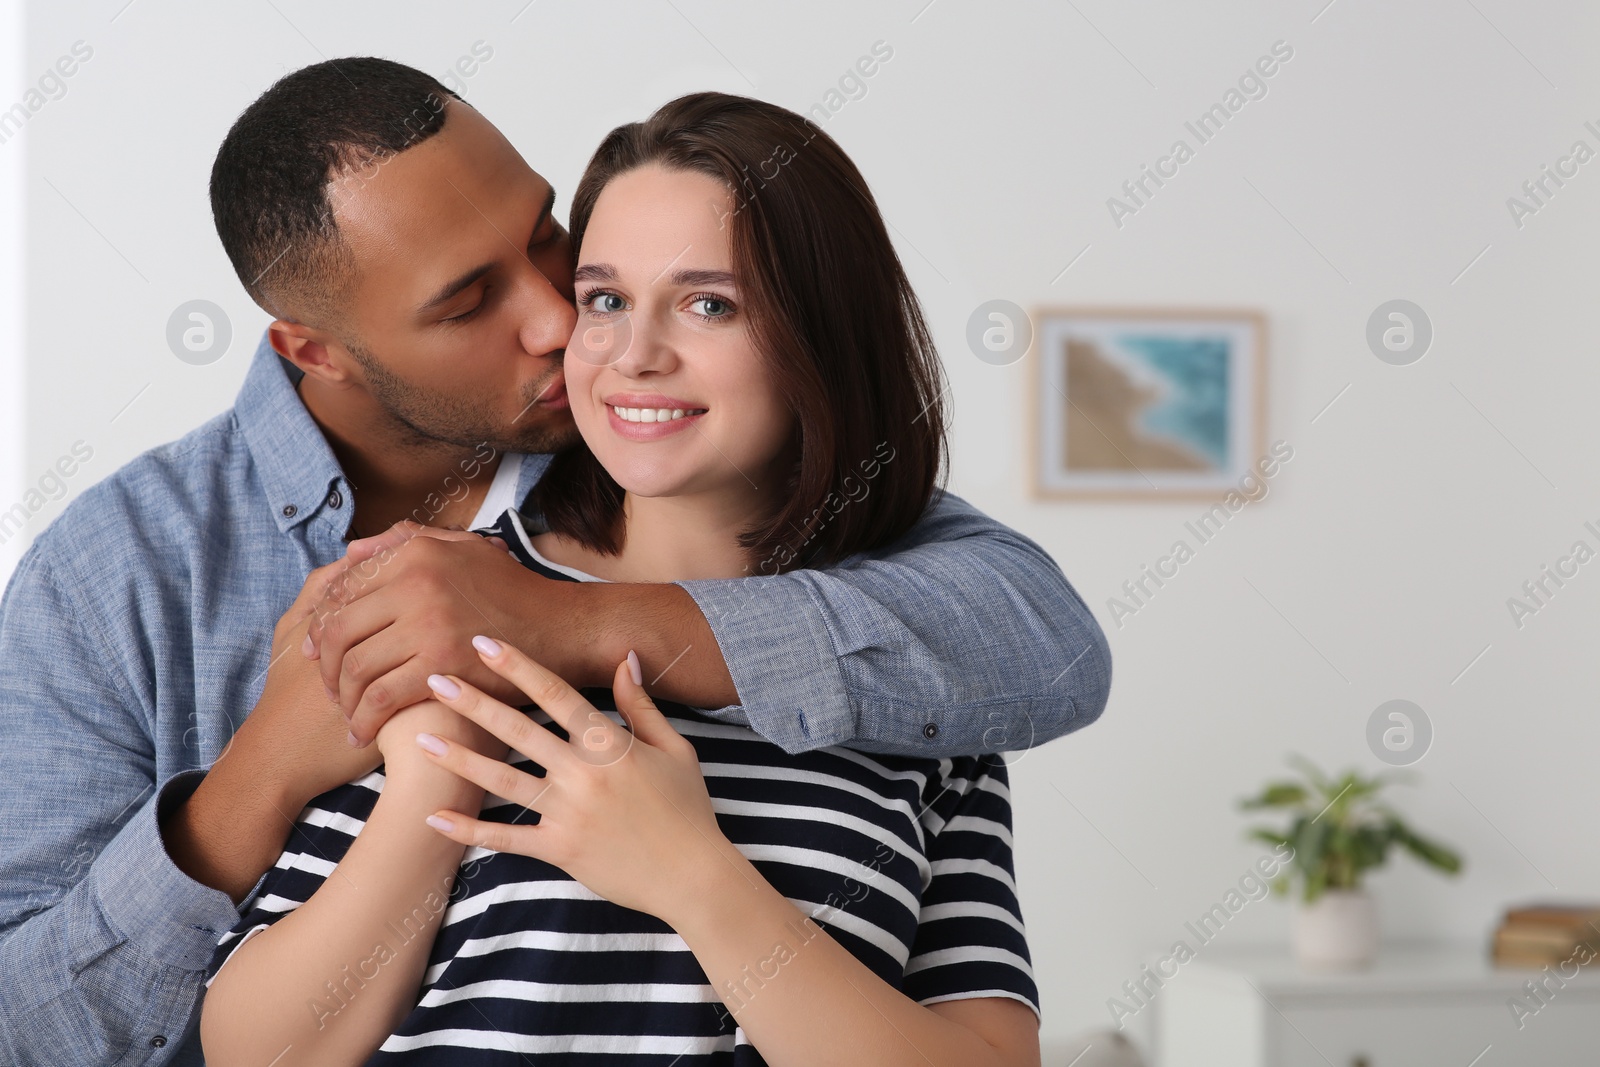 Photo of Dating agency. Man hugging his girlfriend indoors, space for text